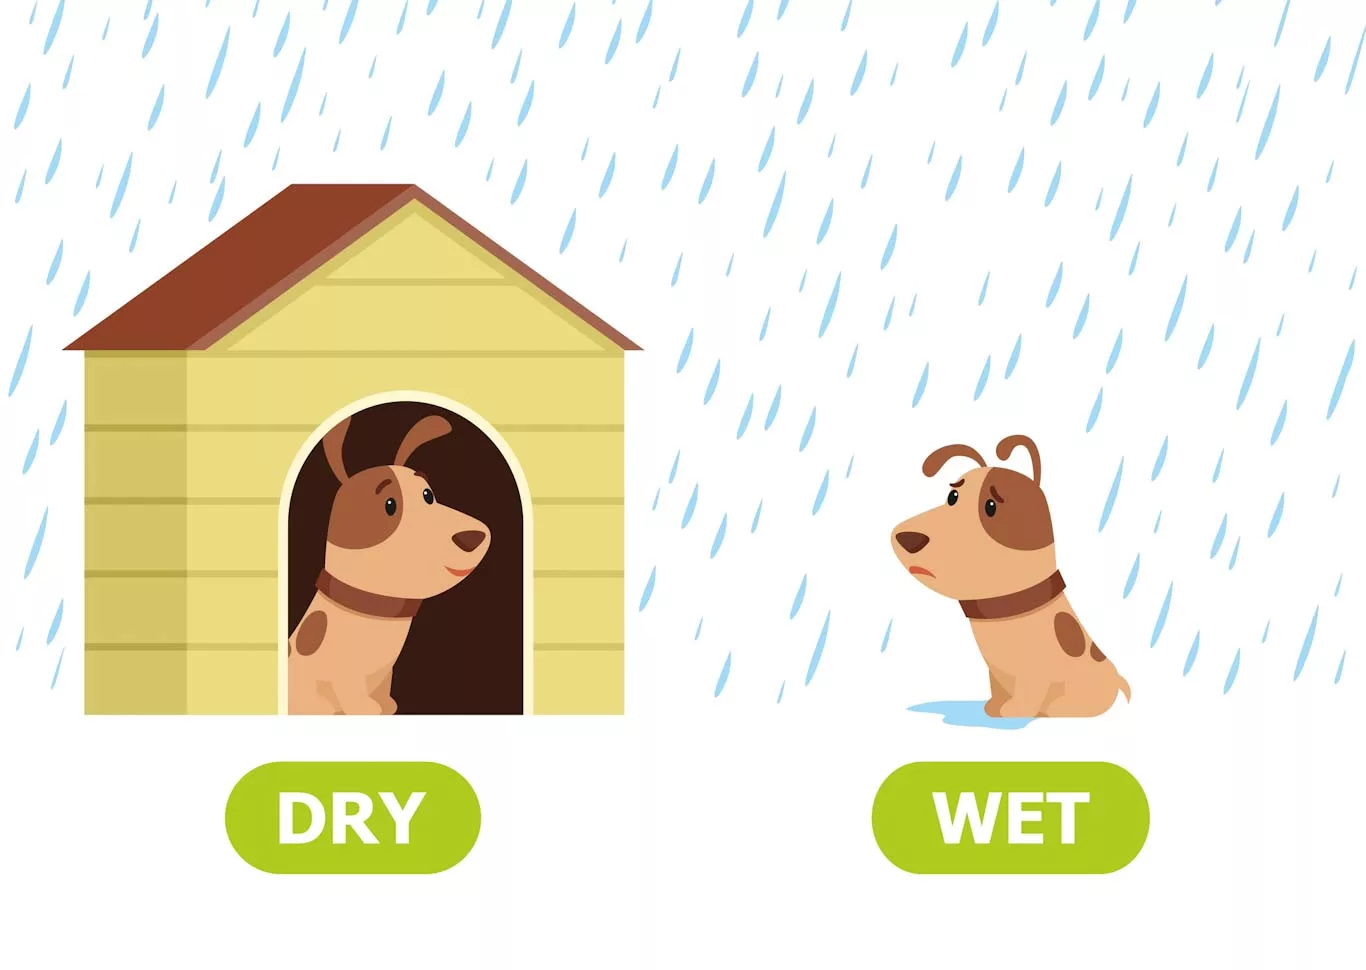 Infographic showing a happy dog in a waterproof dog house and a sad dog wet in the rain. Find out about dog house waterproofing at doghousetimes.com.